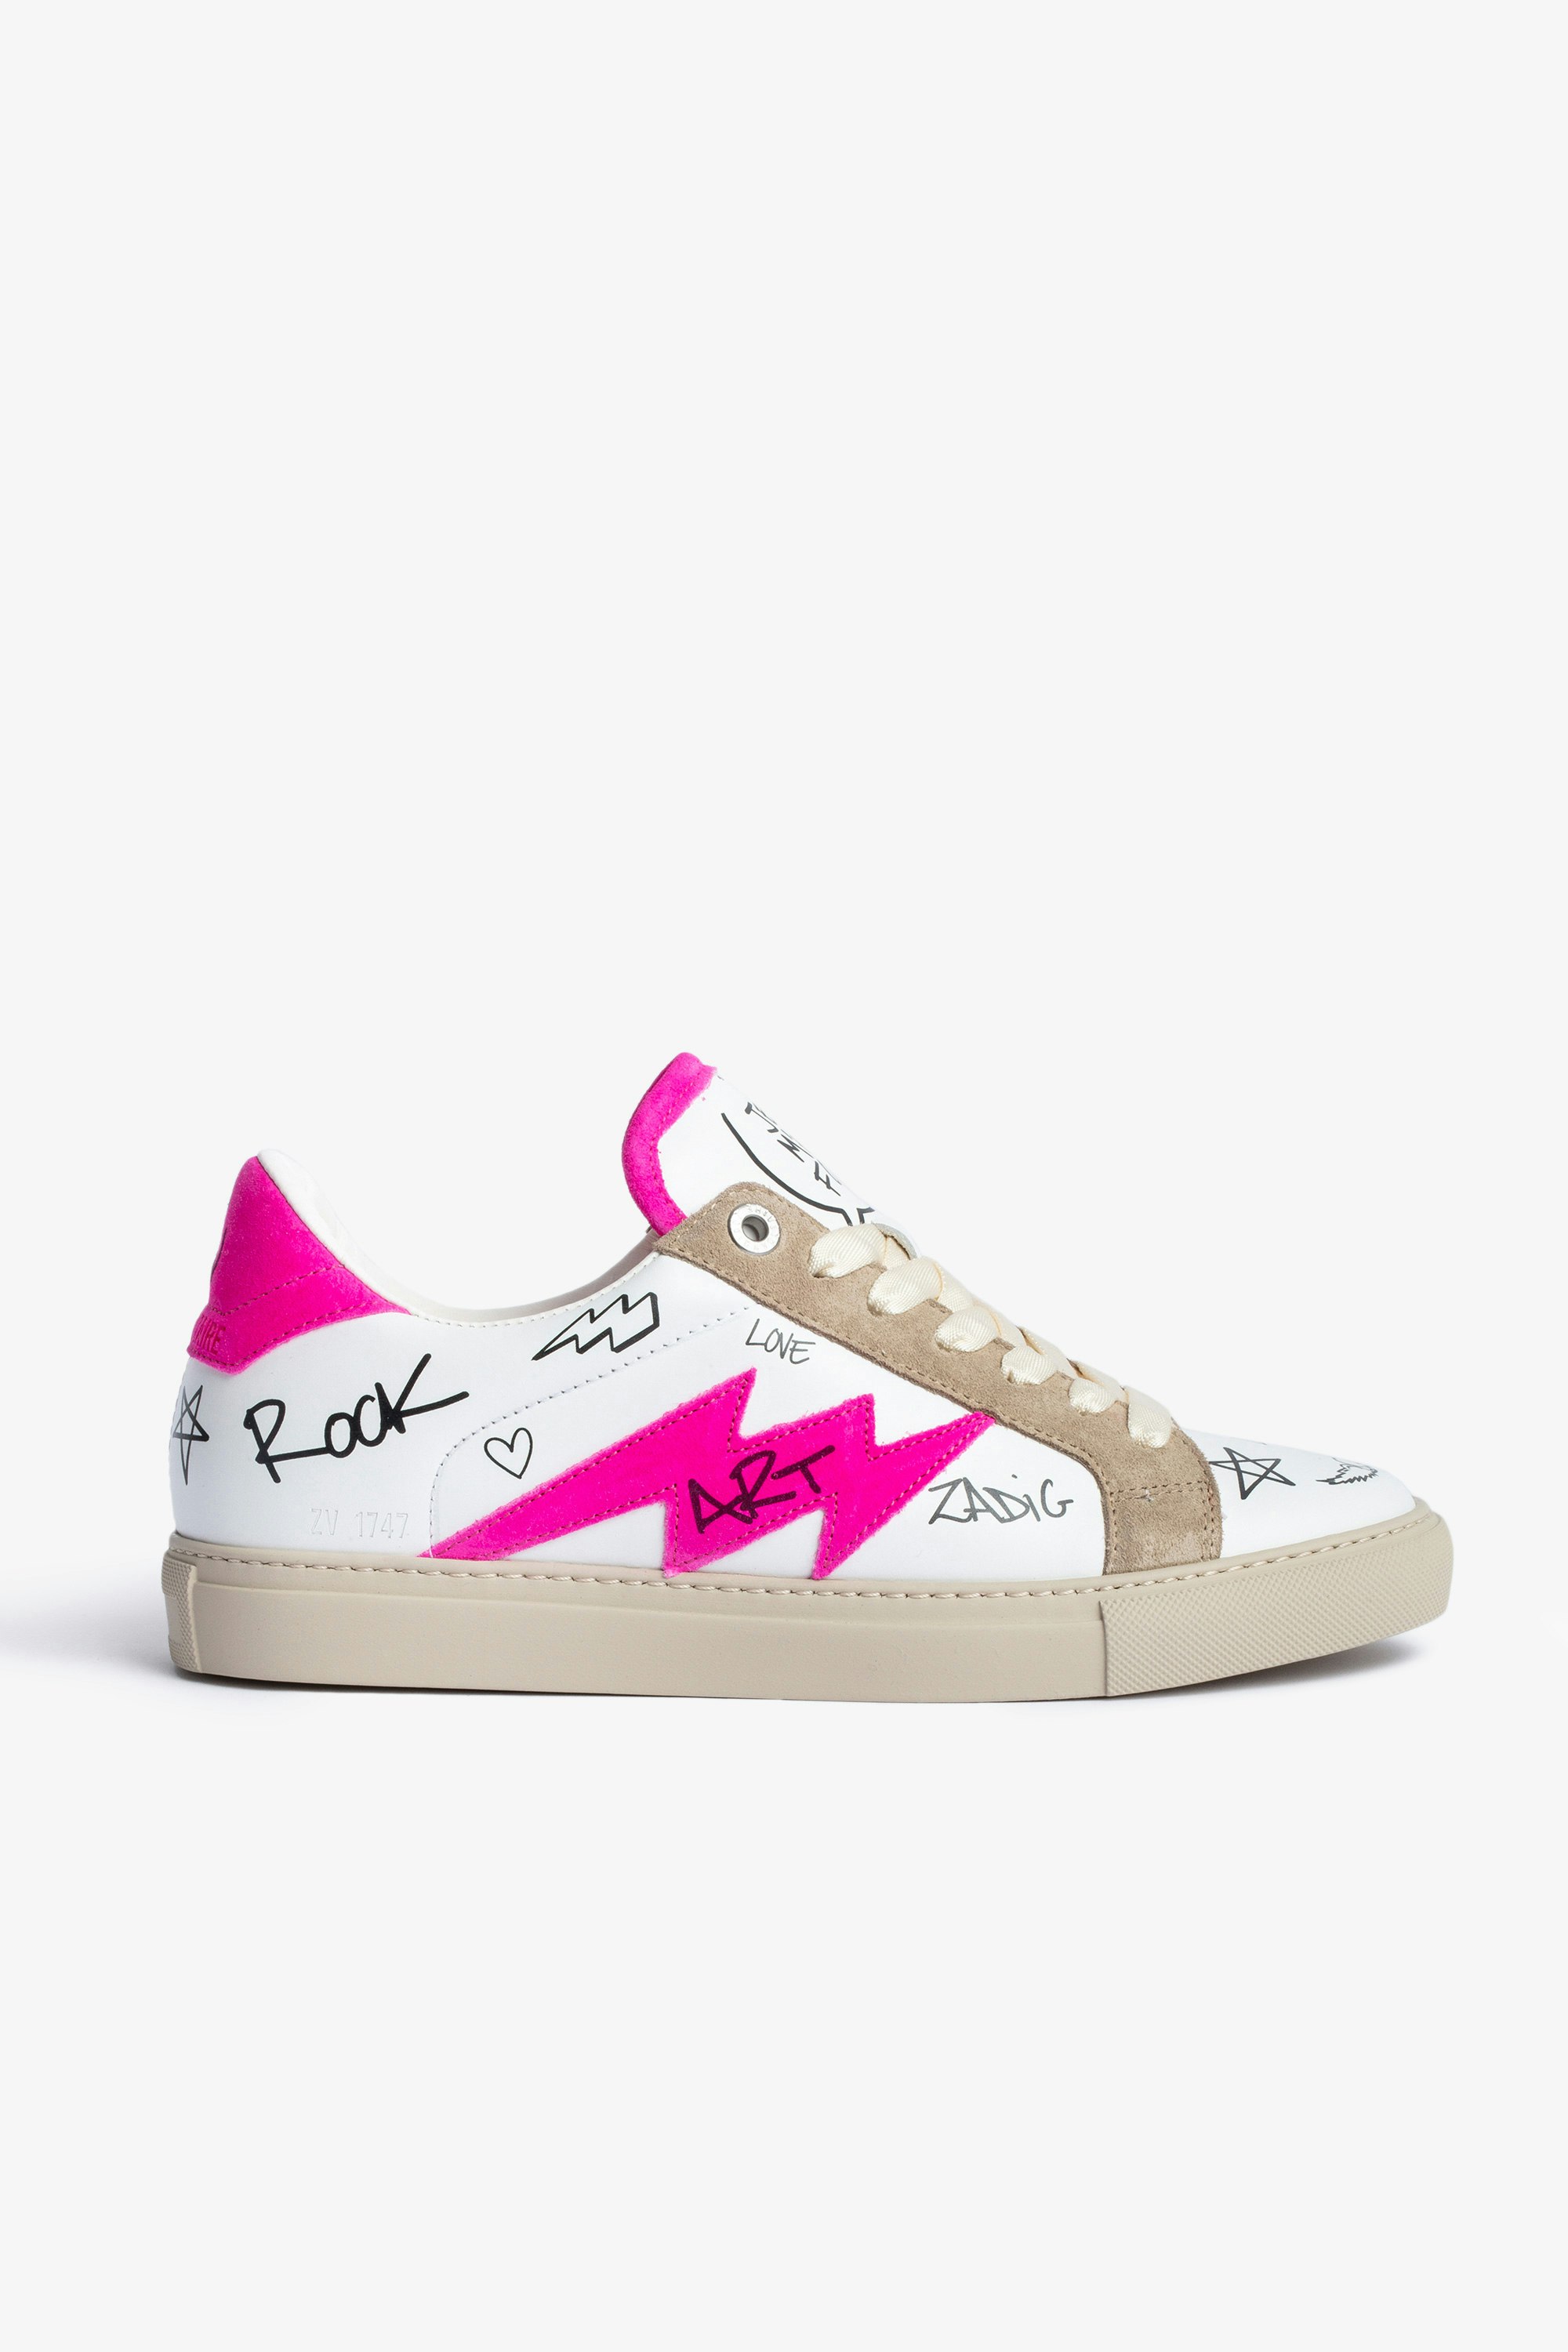 ZV1747 Charms Print Sneakers Low-top trainers in pink and white smooth leather and suede with lettering